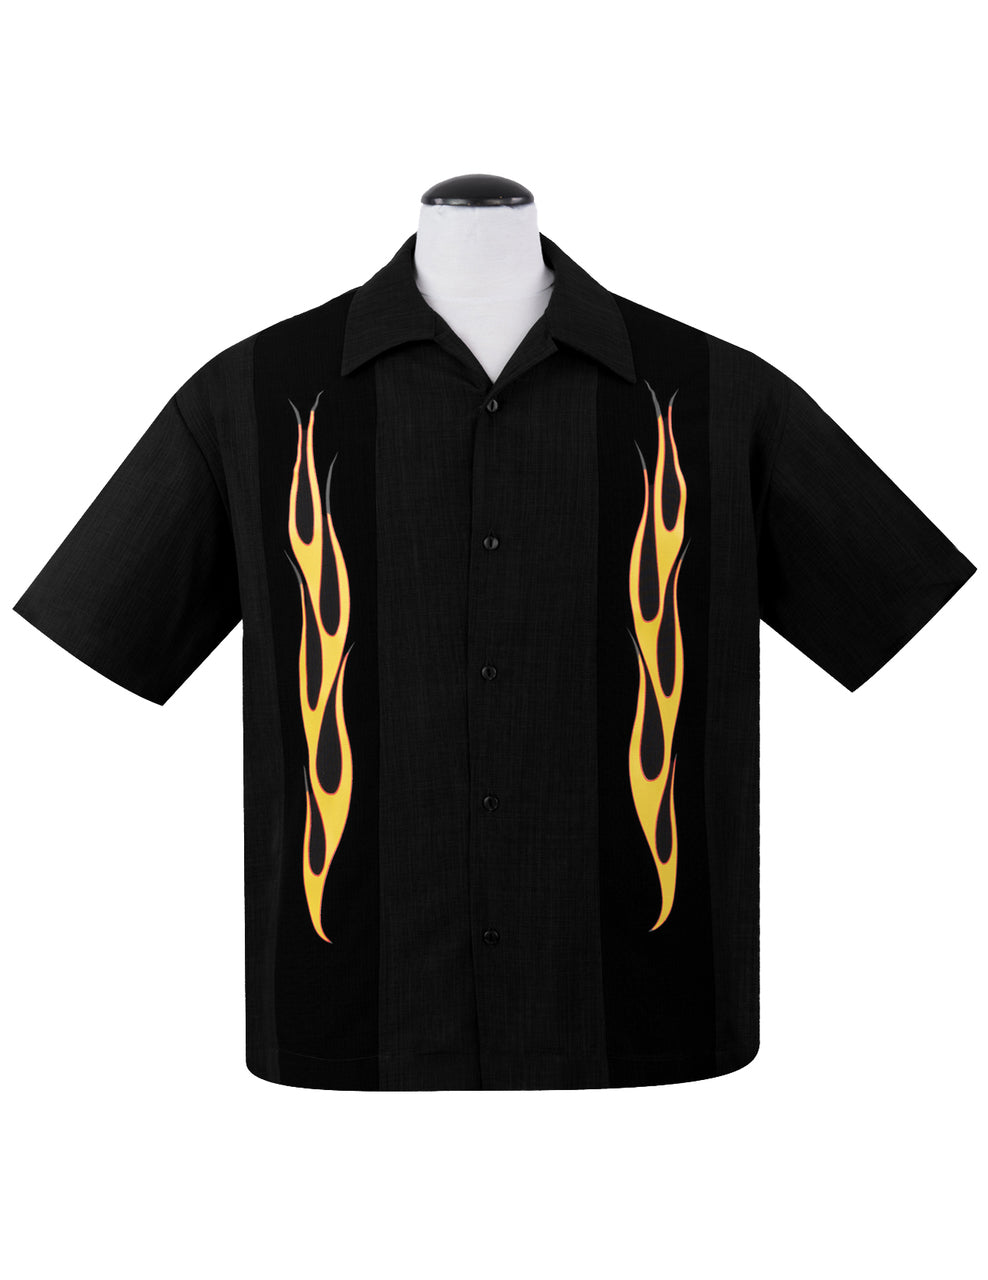 Flame N Hot Bowling Shirt by Steady Clothing